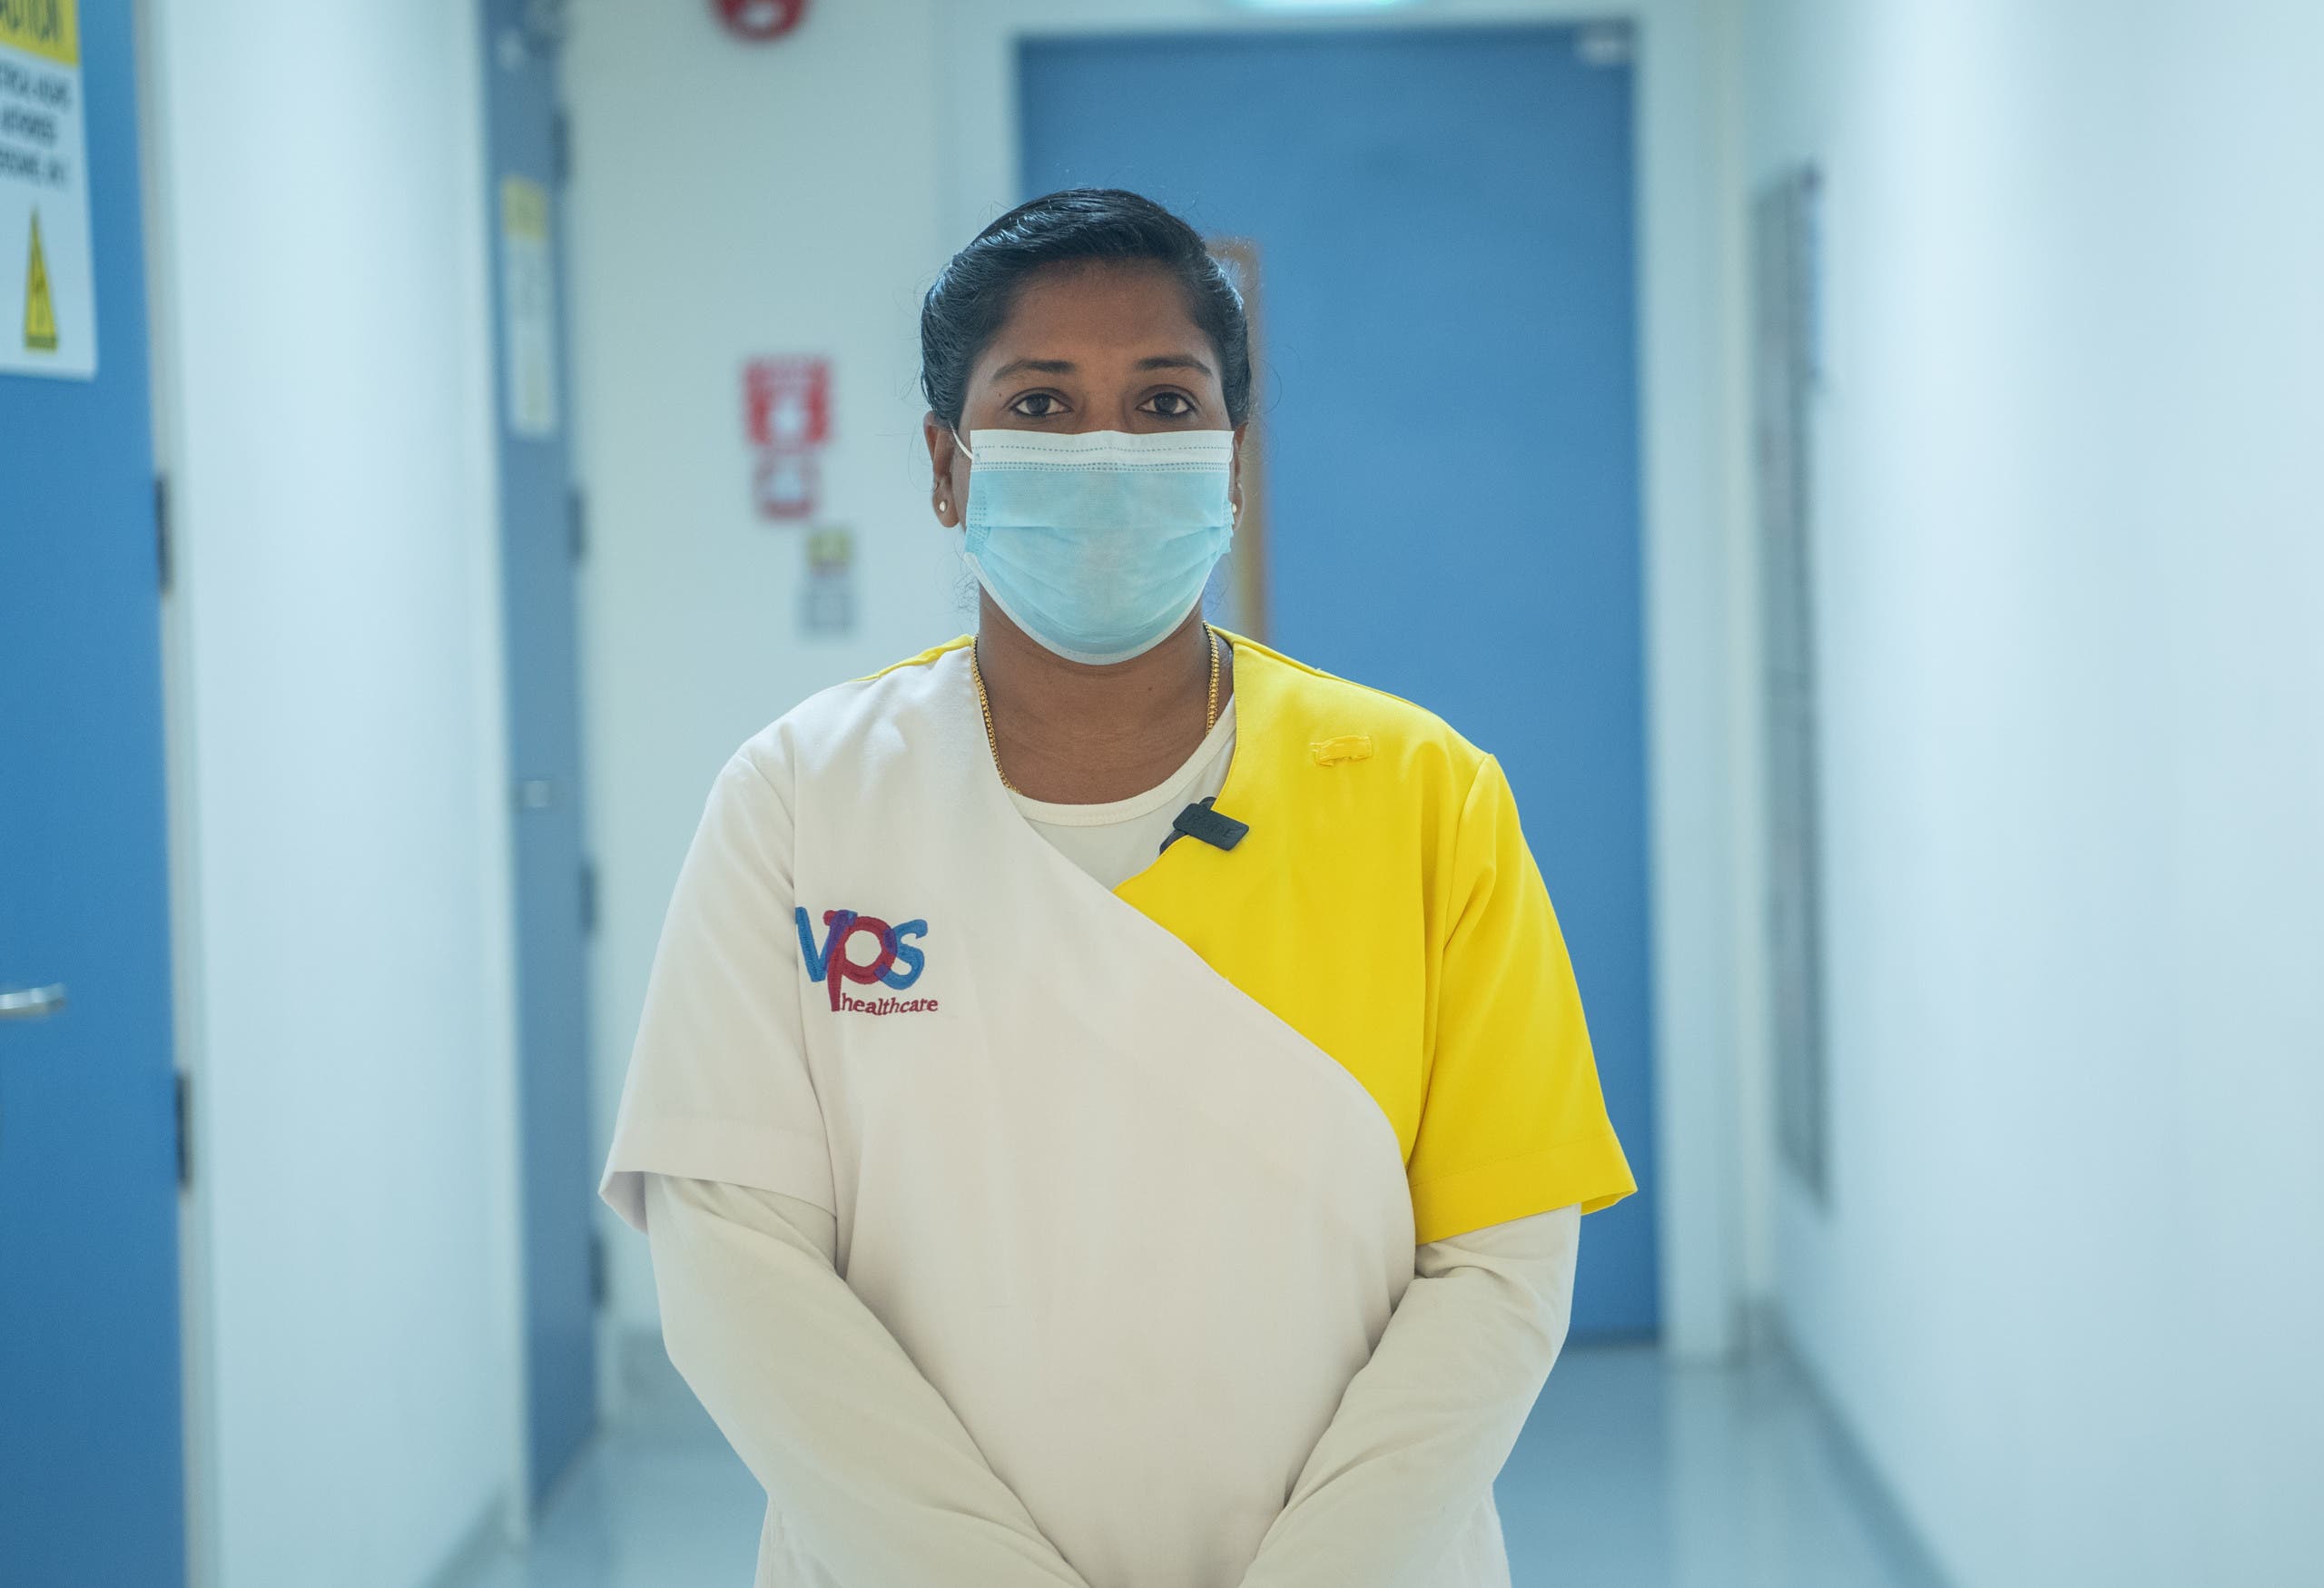 Health worker Ambily MB, who is one among the many stranded in the UAE after falling victim to the con, is among those finally relieved that her plight, after three months of uncertainty has finally come to an end. (Supplied)